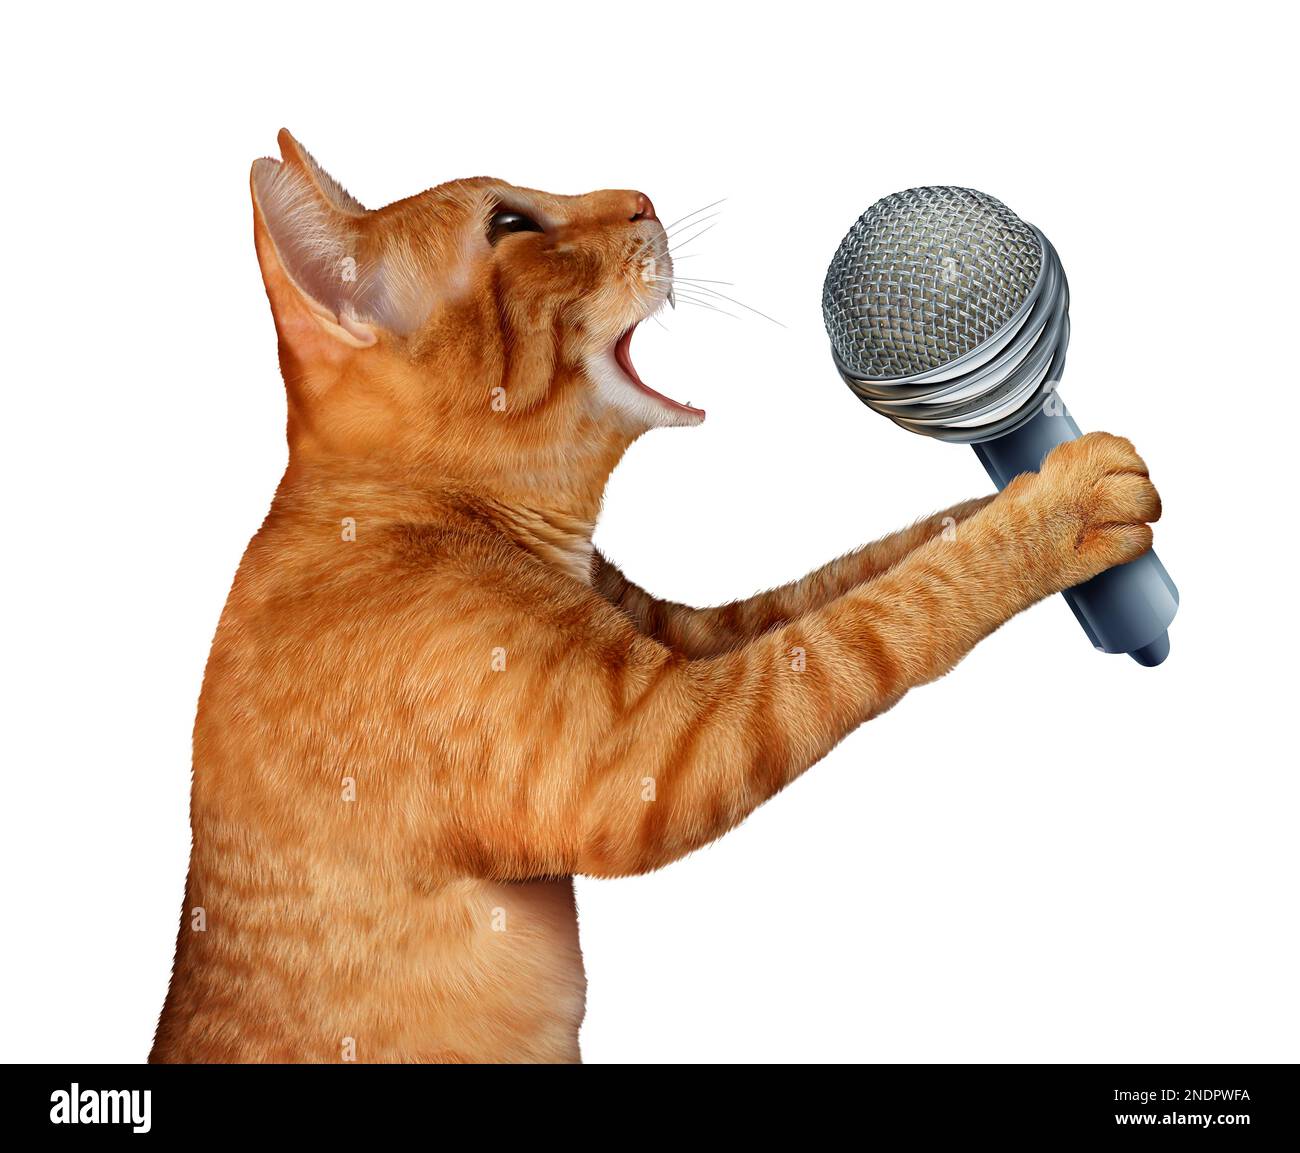 Singing cat as a generic feline holding a microphone to meow or meowing to announce news or promote pet and veterinary issues or animal marketing Stock Photo